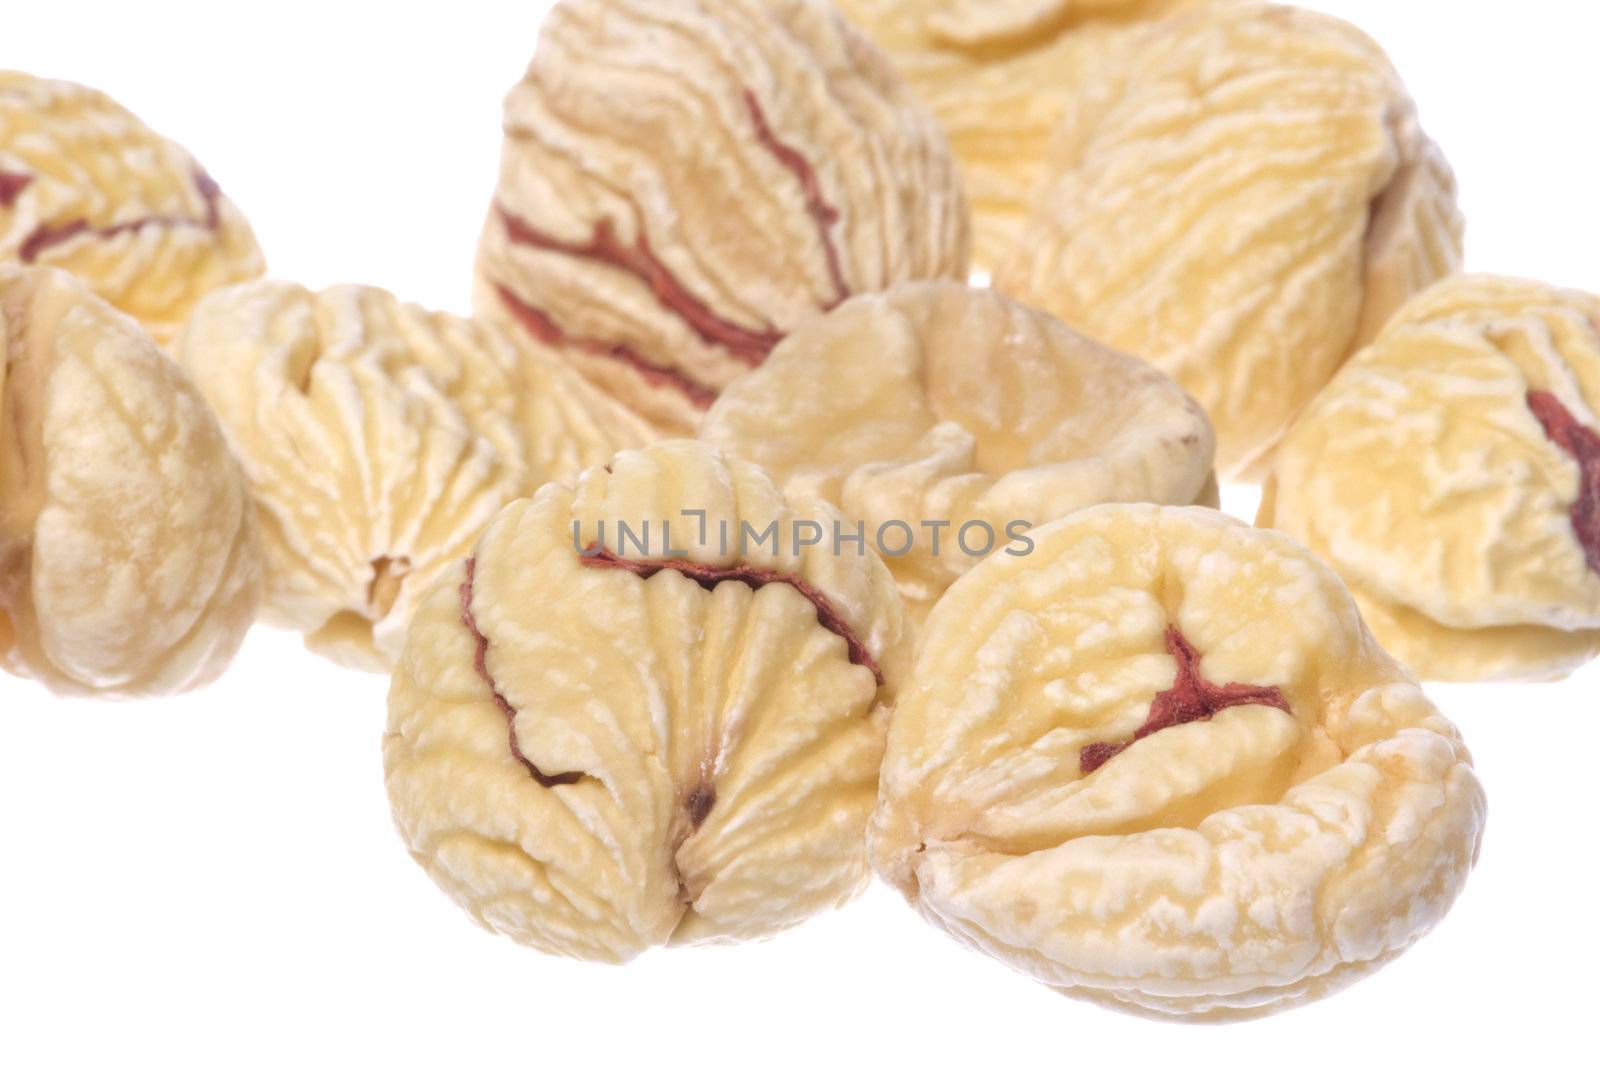 Isolated macro image of dried chestnuts.